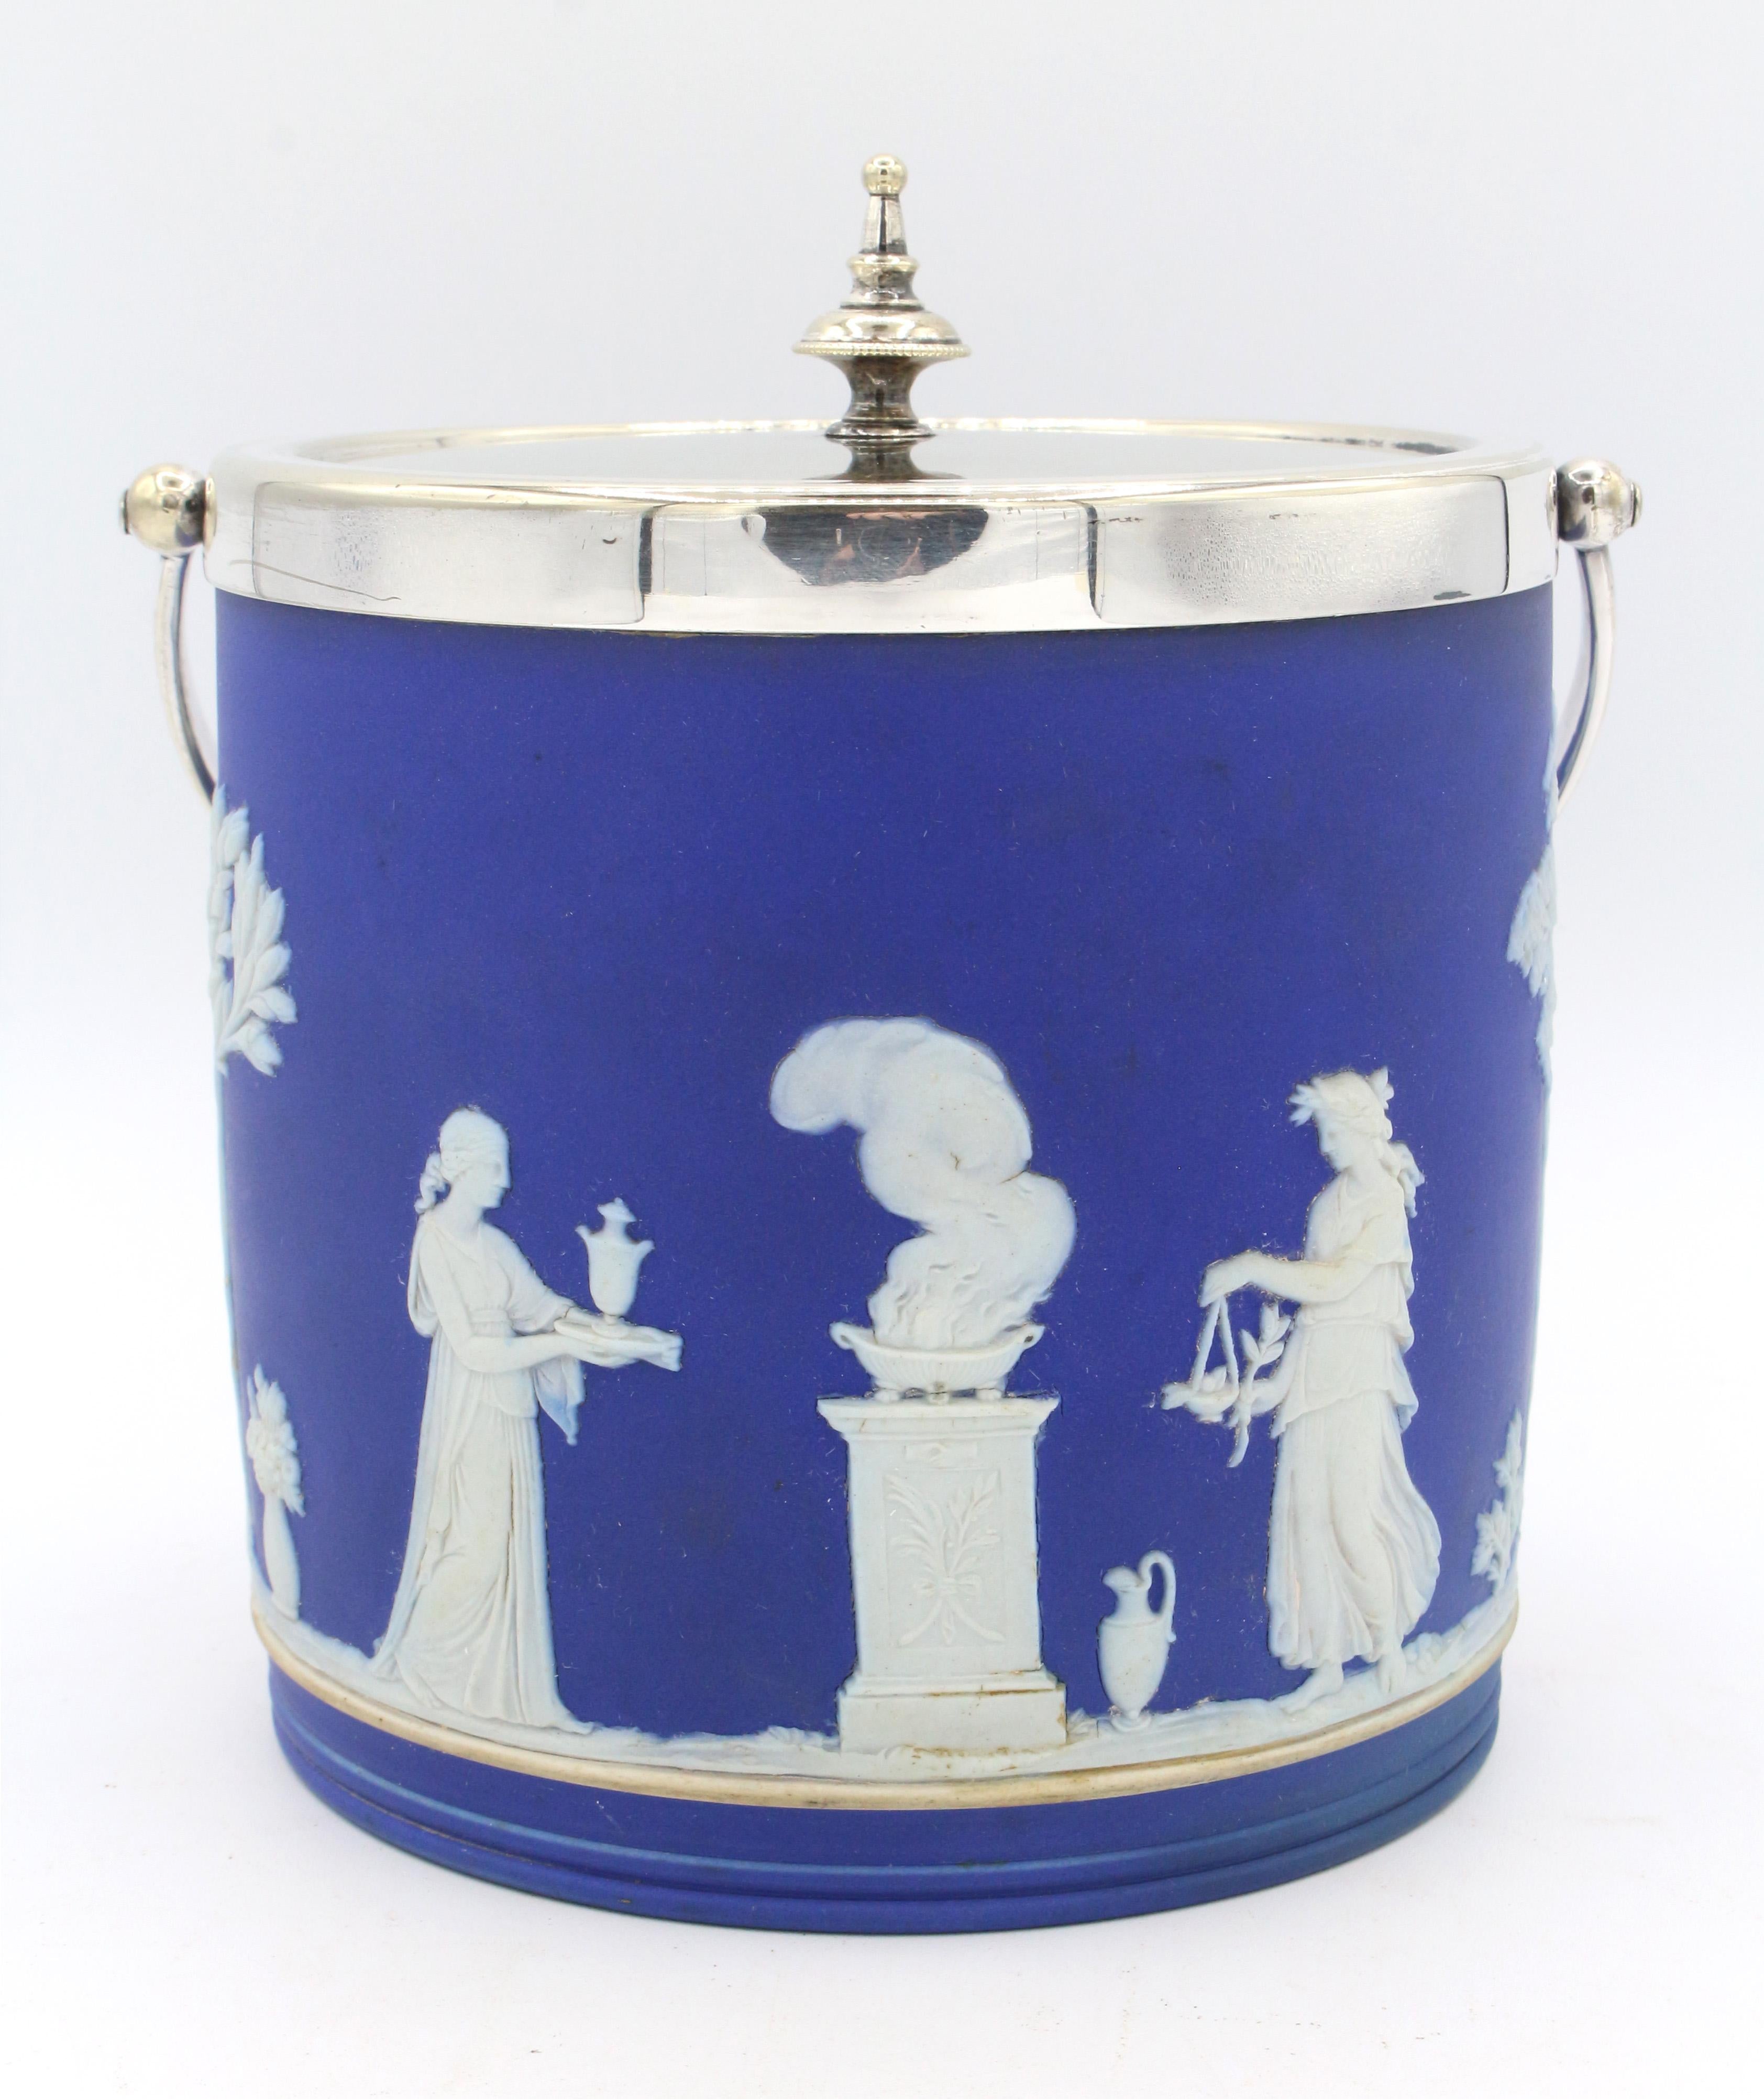 Deep blue Jasperware Wedgwood biscuit barrel with silver plated fittings, late 19th century. The silver plated fittings marked by Daniel & Arter of Birmingham. The box is marked 